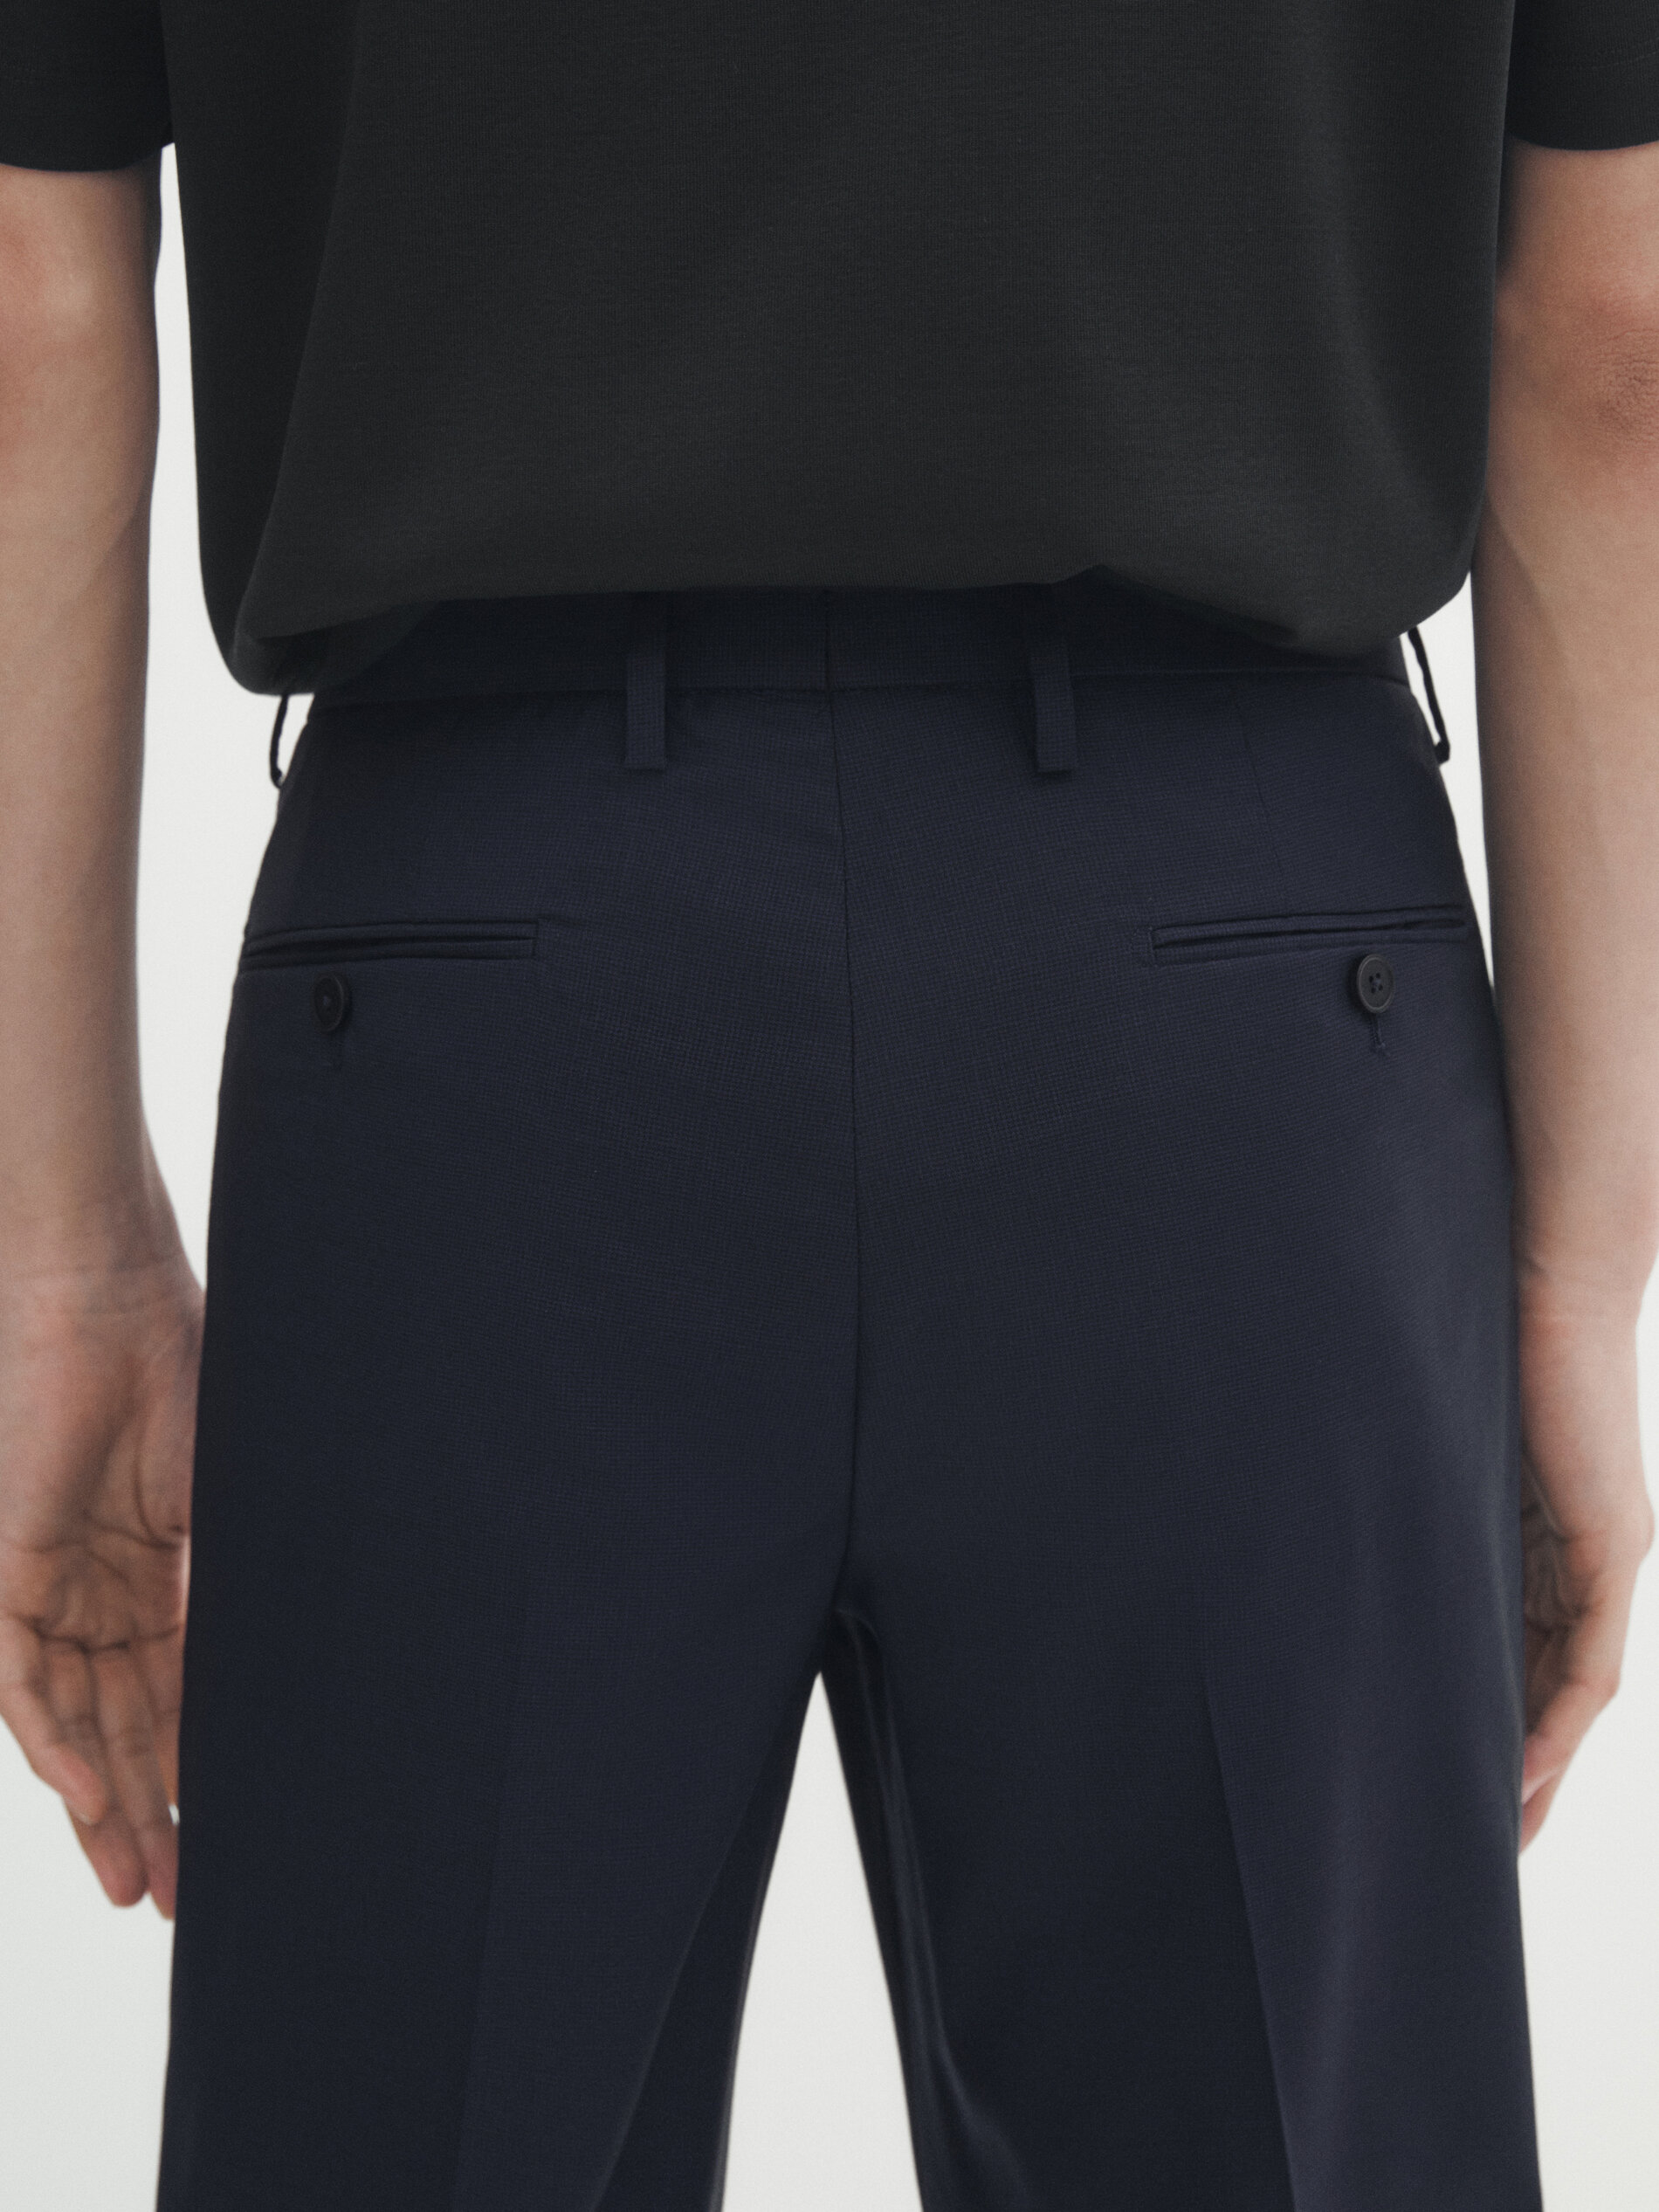 Slimfit 120s pure wool trousers with elastic waistband LIGHT GREY Pal  Zileri  Shop Online